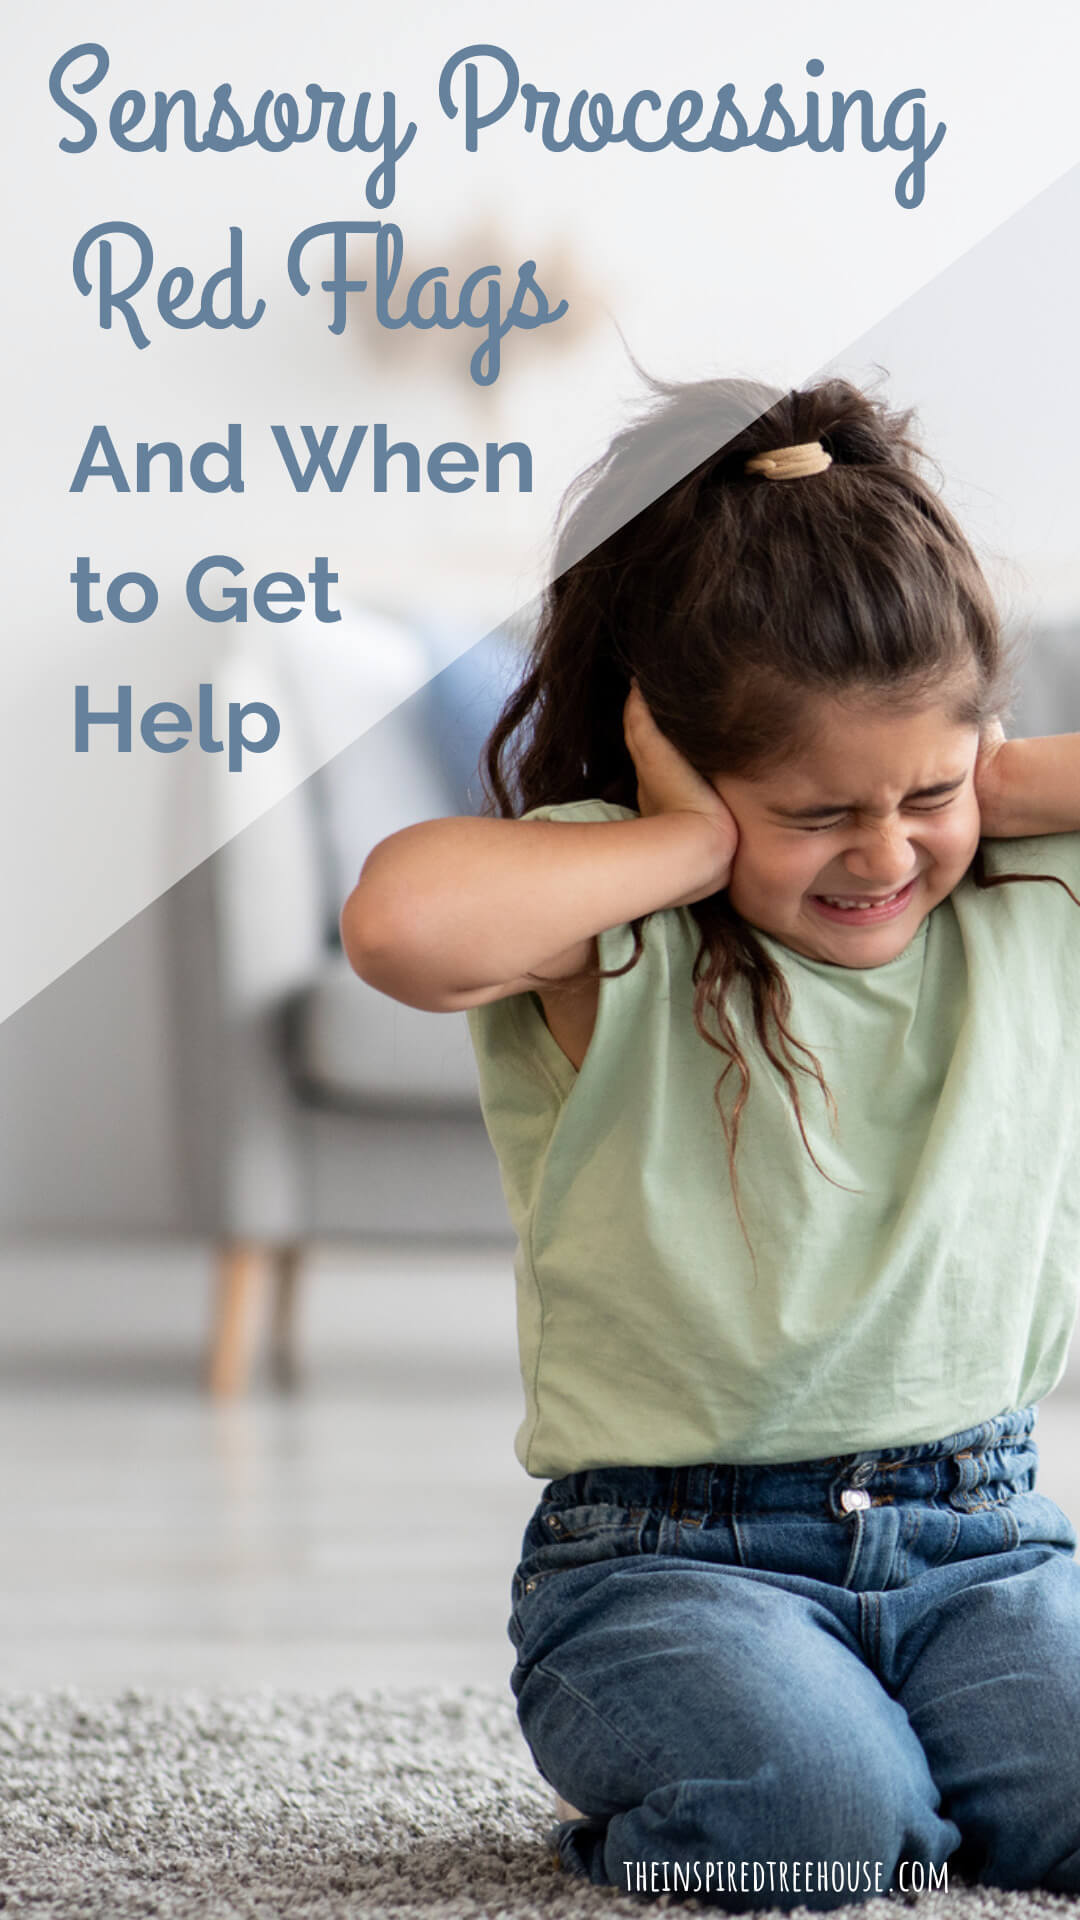 Sensory Red Flags and When to Get Help - The Inspired Treehouse